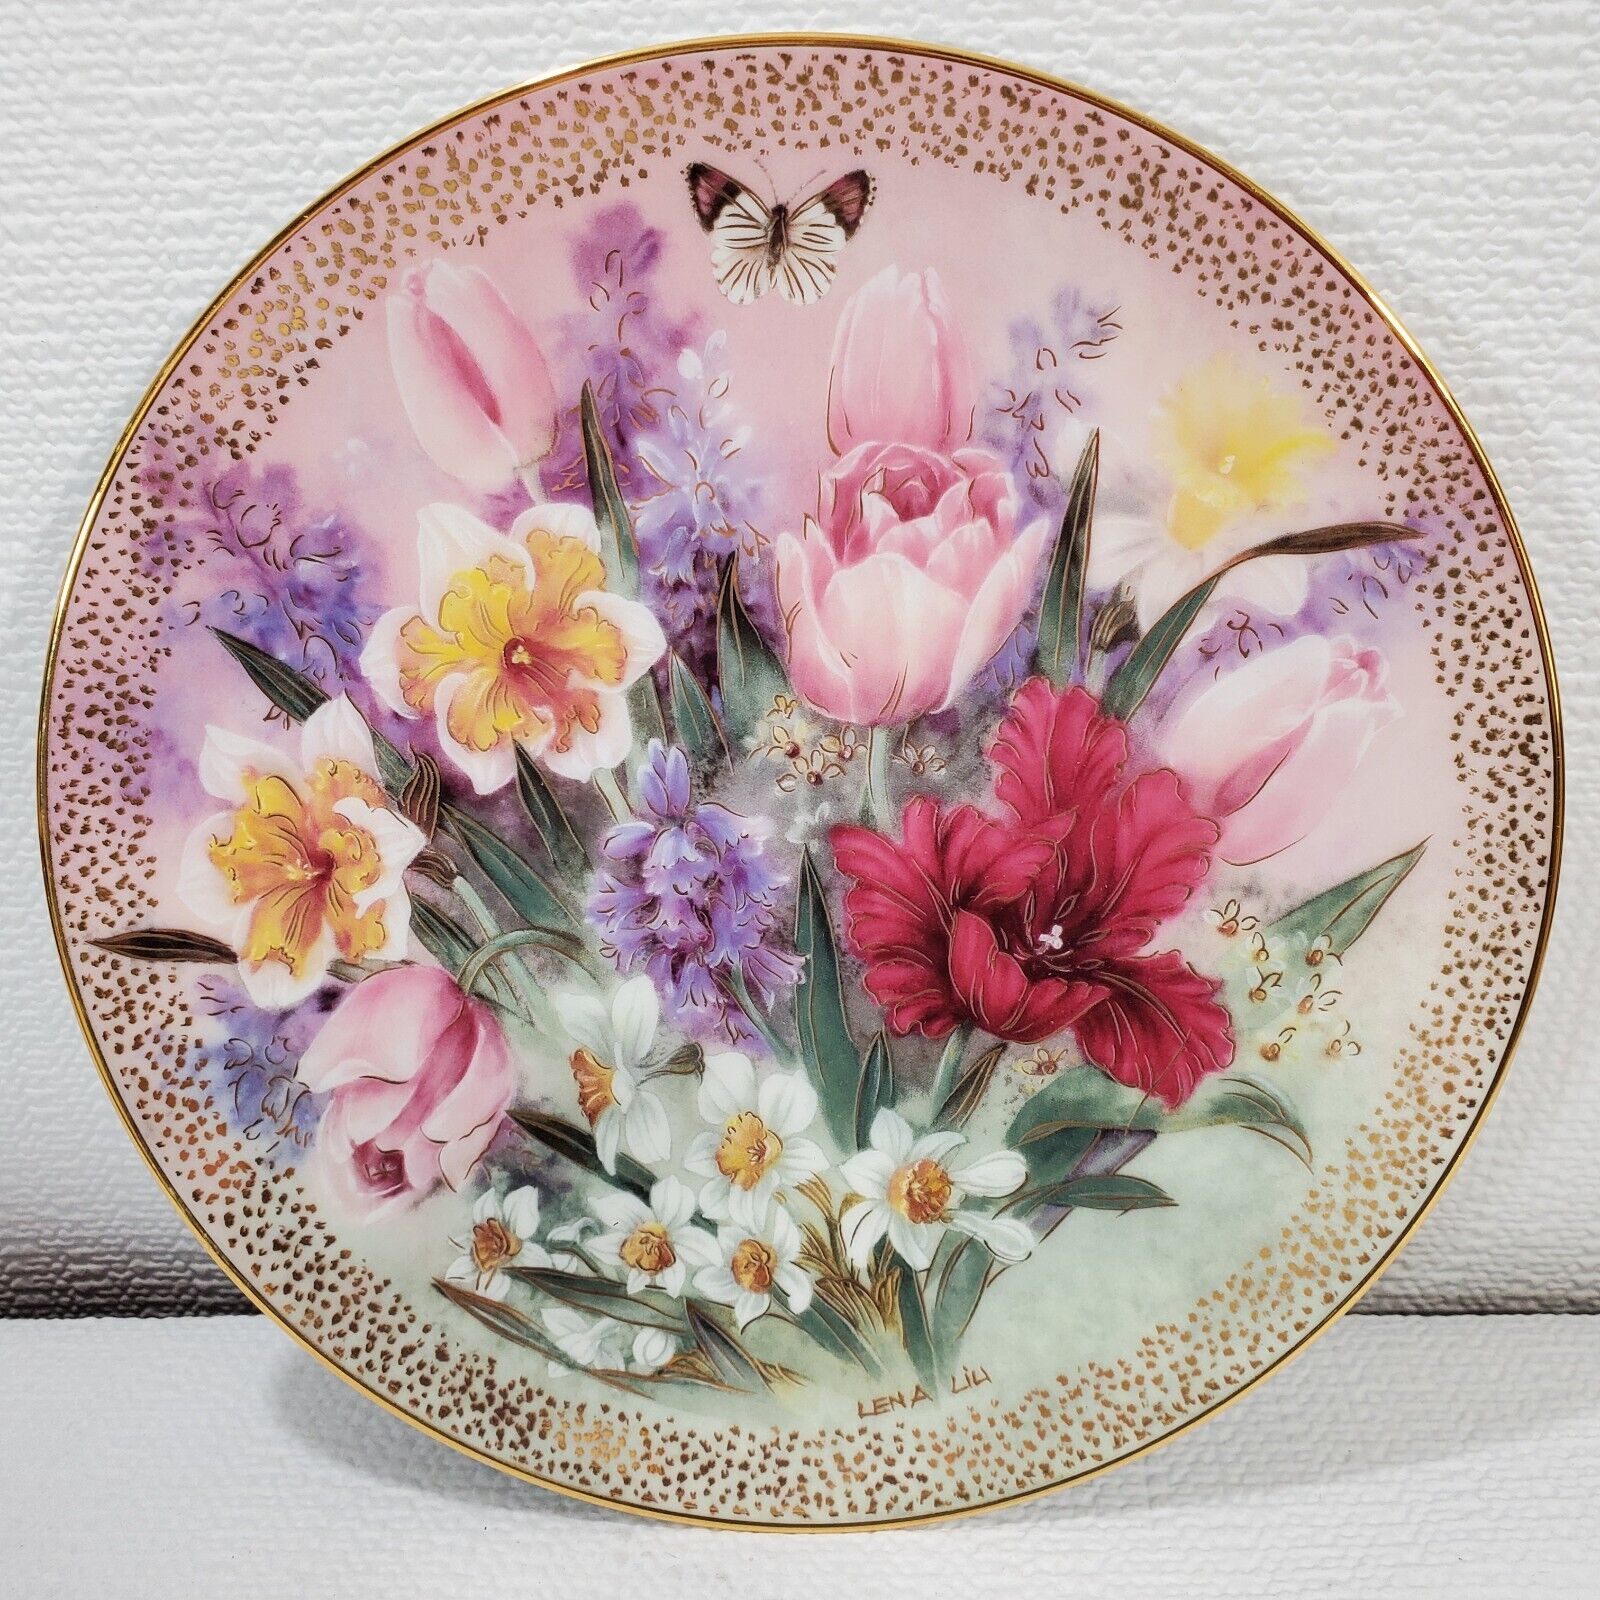 Lena Liu Tulip Ensemble Collector Plate 2 in Symphony of Shimmering Beauty 1991